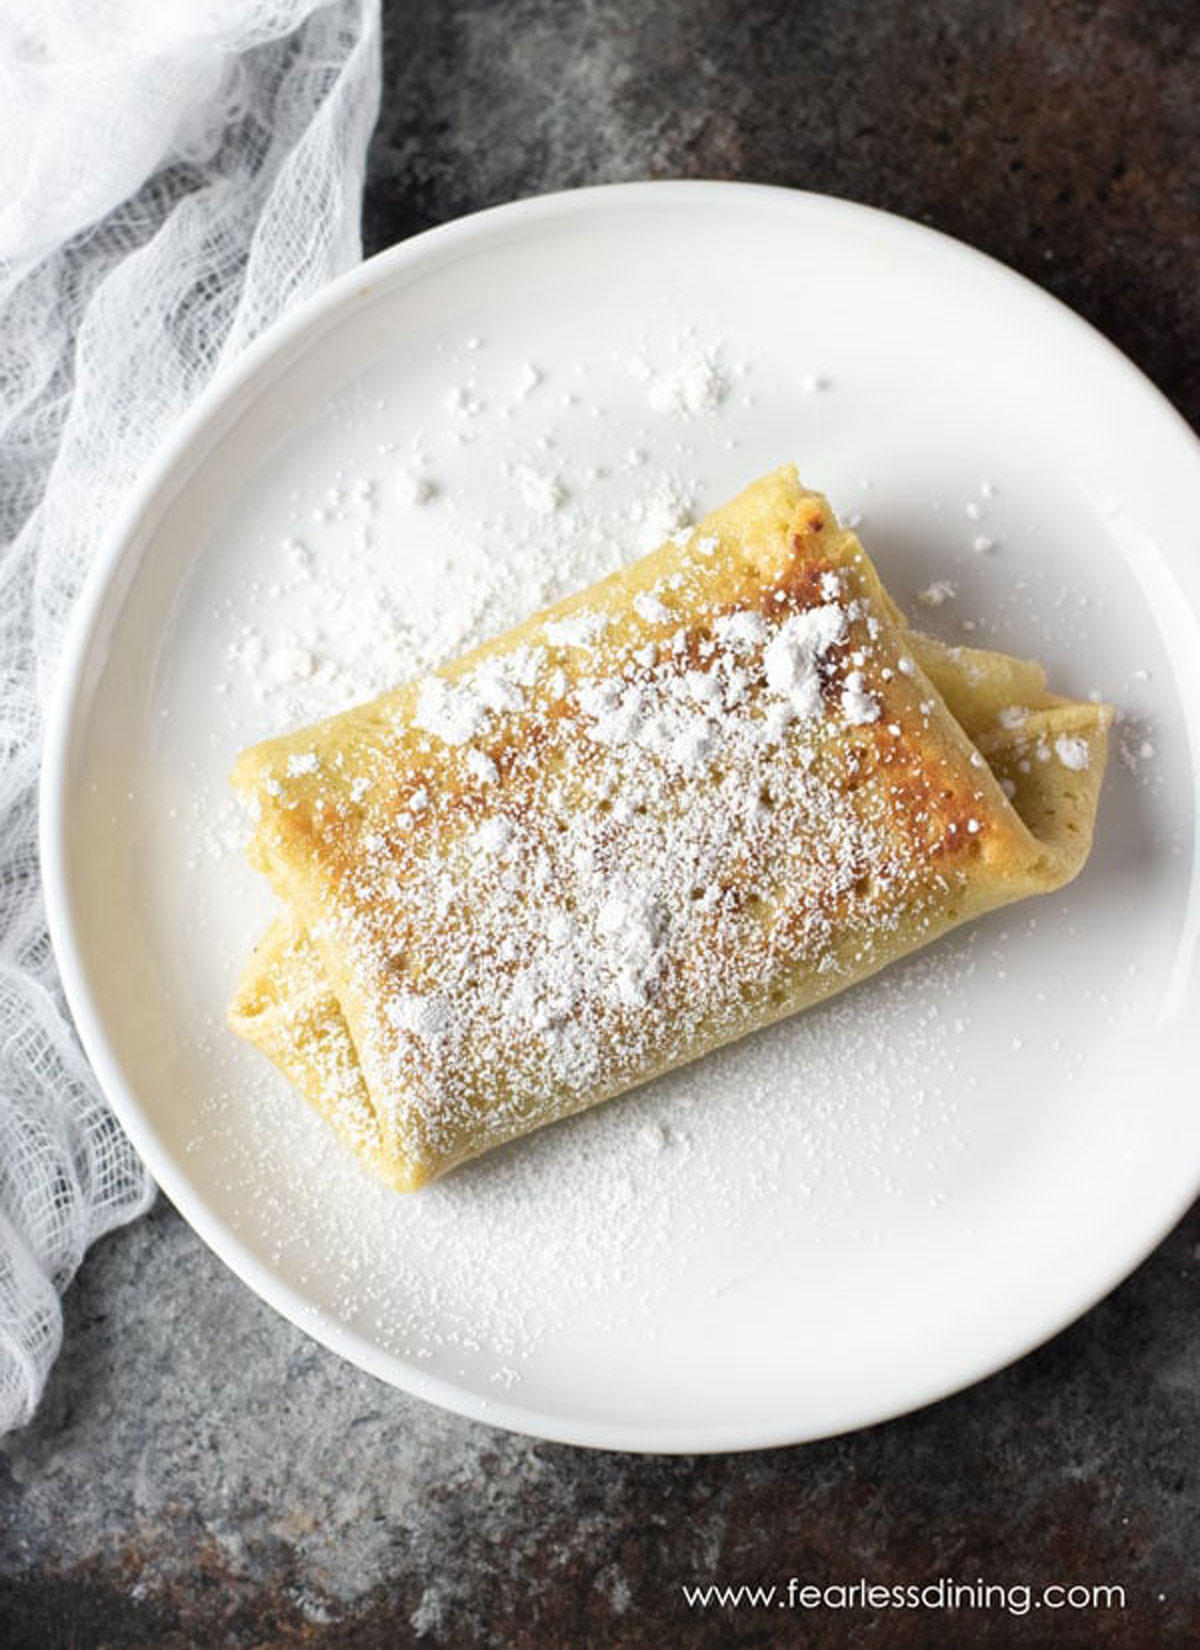 The top view of a cooked blintz dusted with powdered sugar.